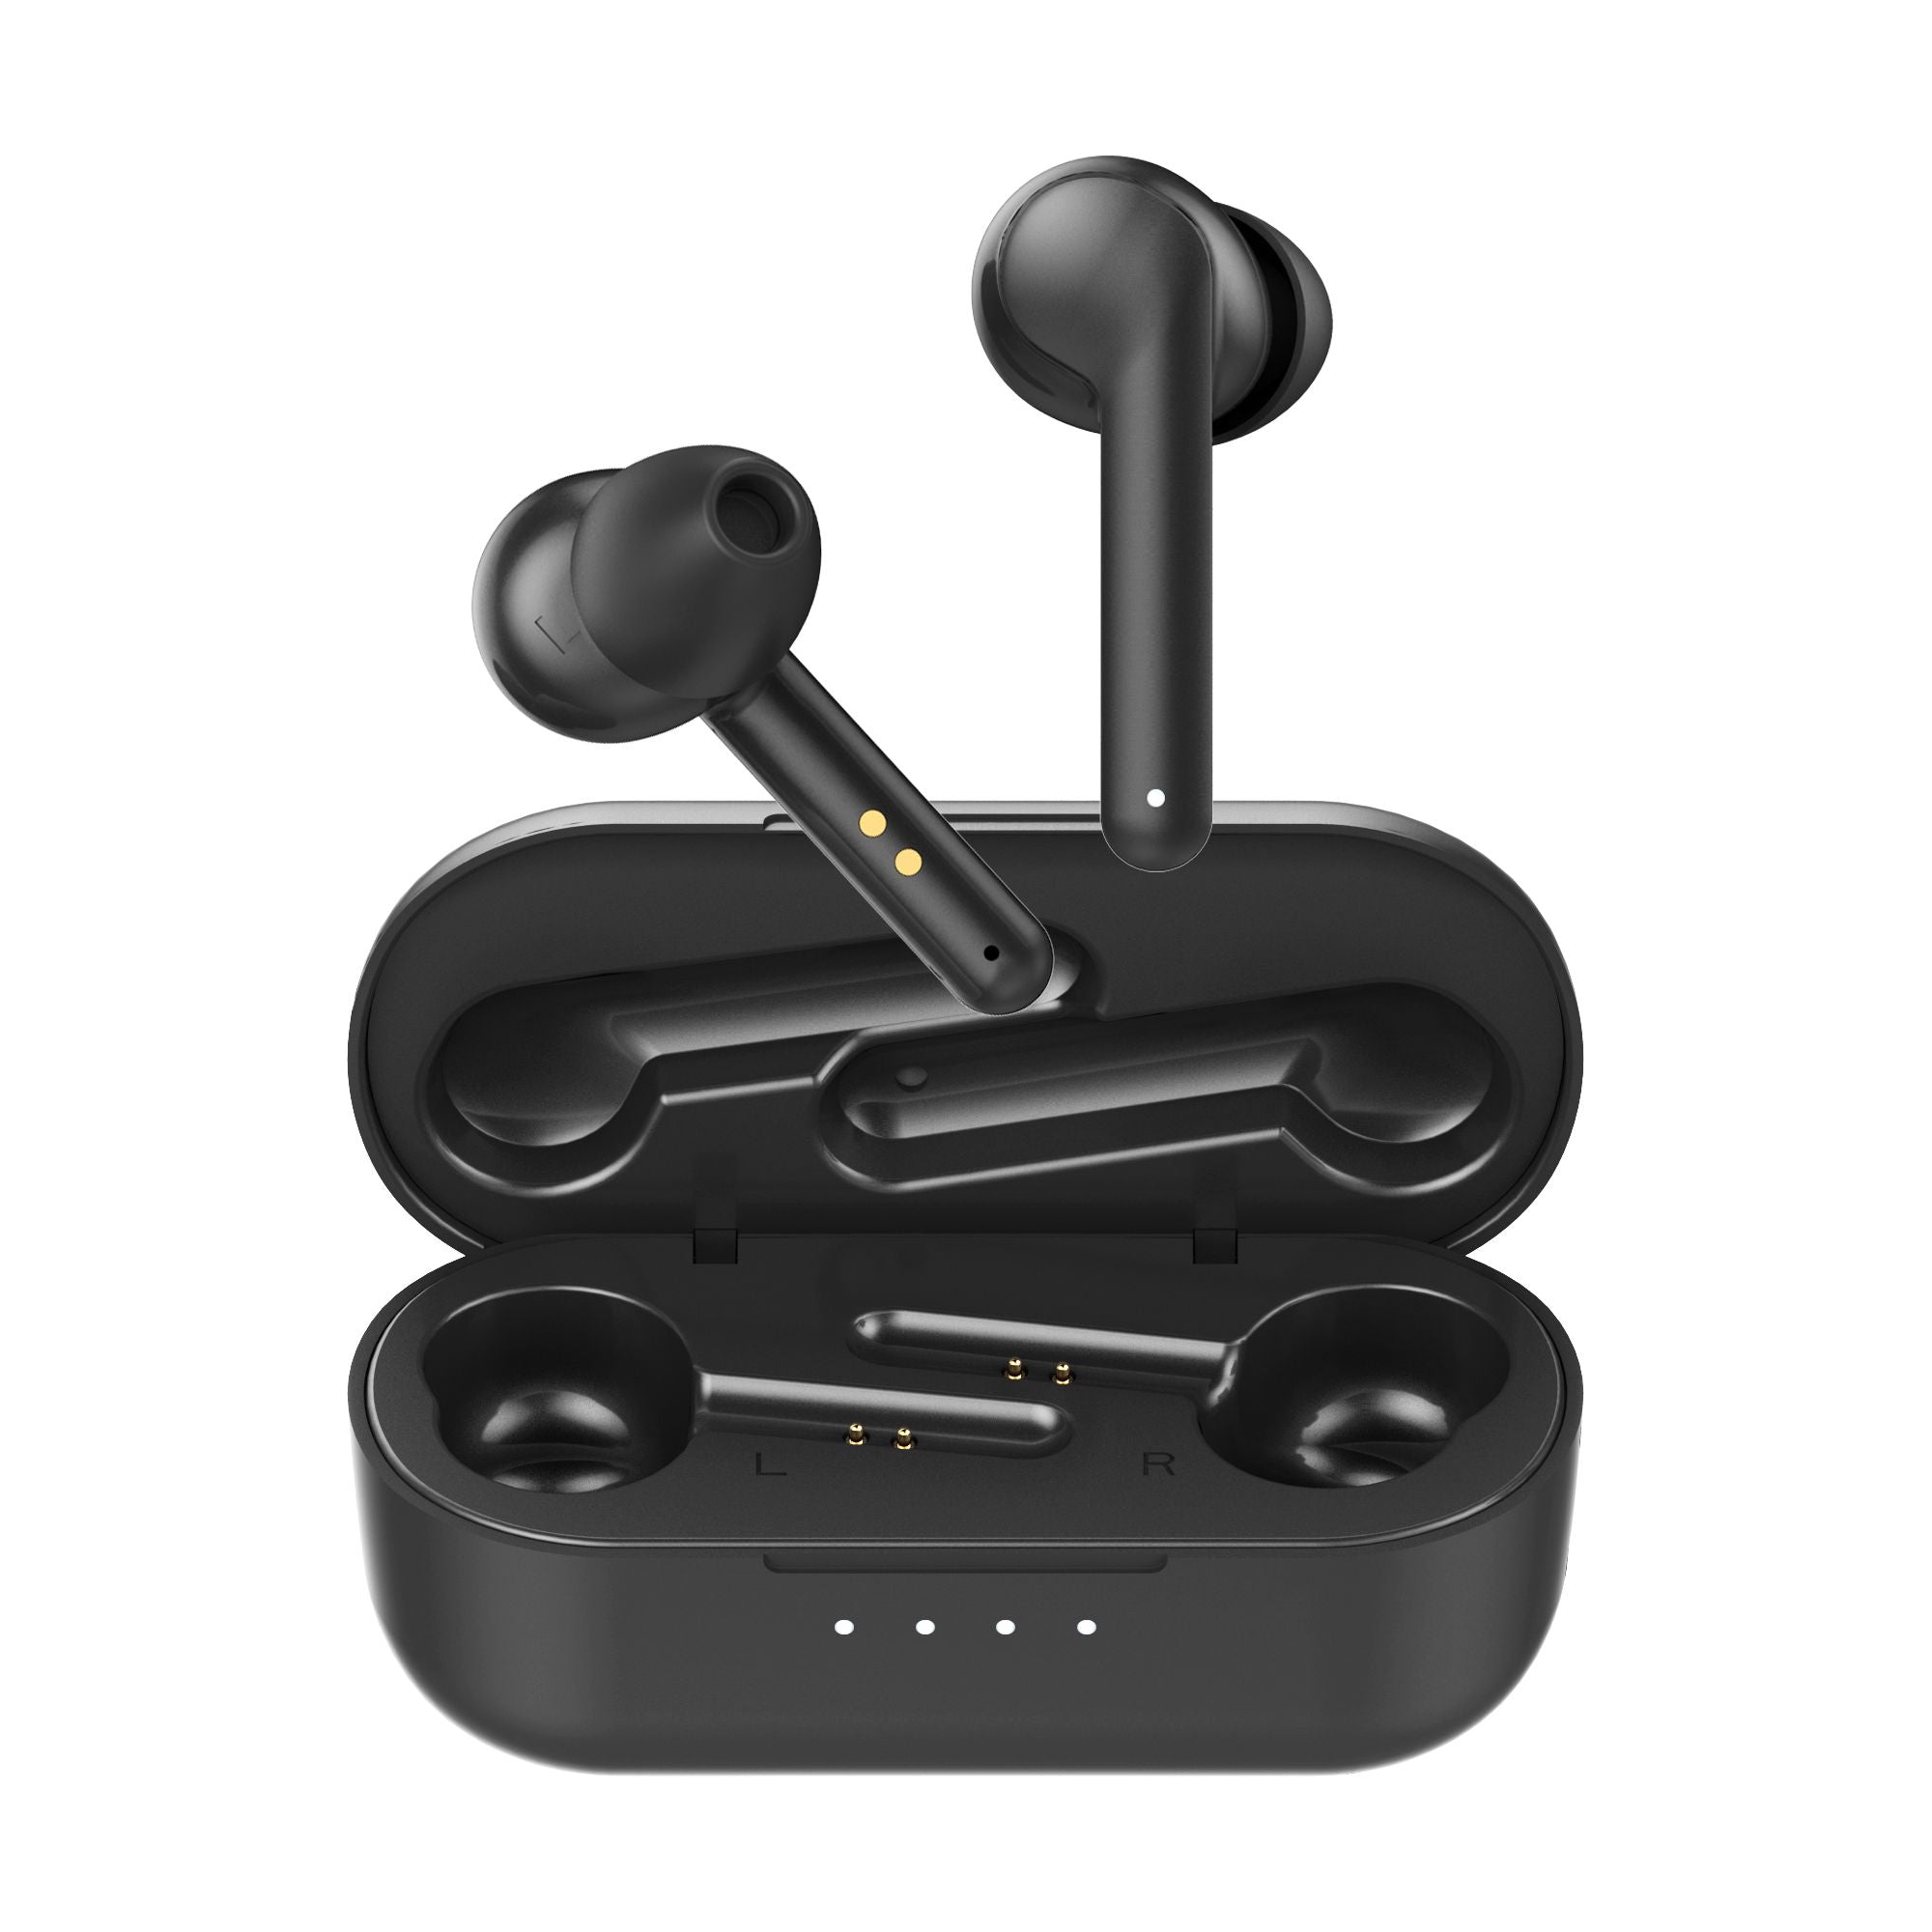 mbeat-e1-true-wireless-earbuds-up-to-4hr-play-time-14hr-charge-case-easy-pair